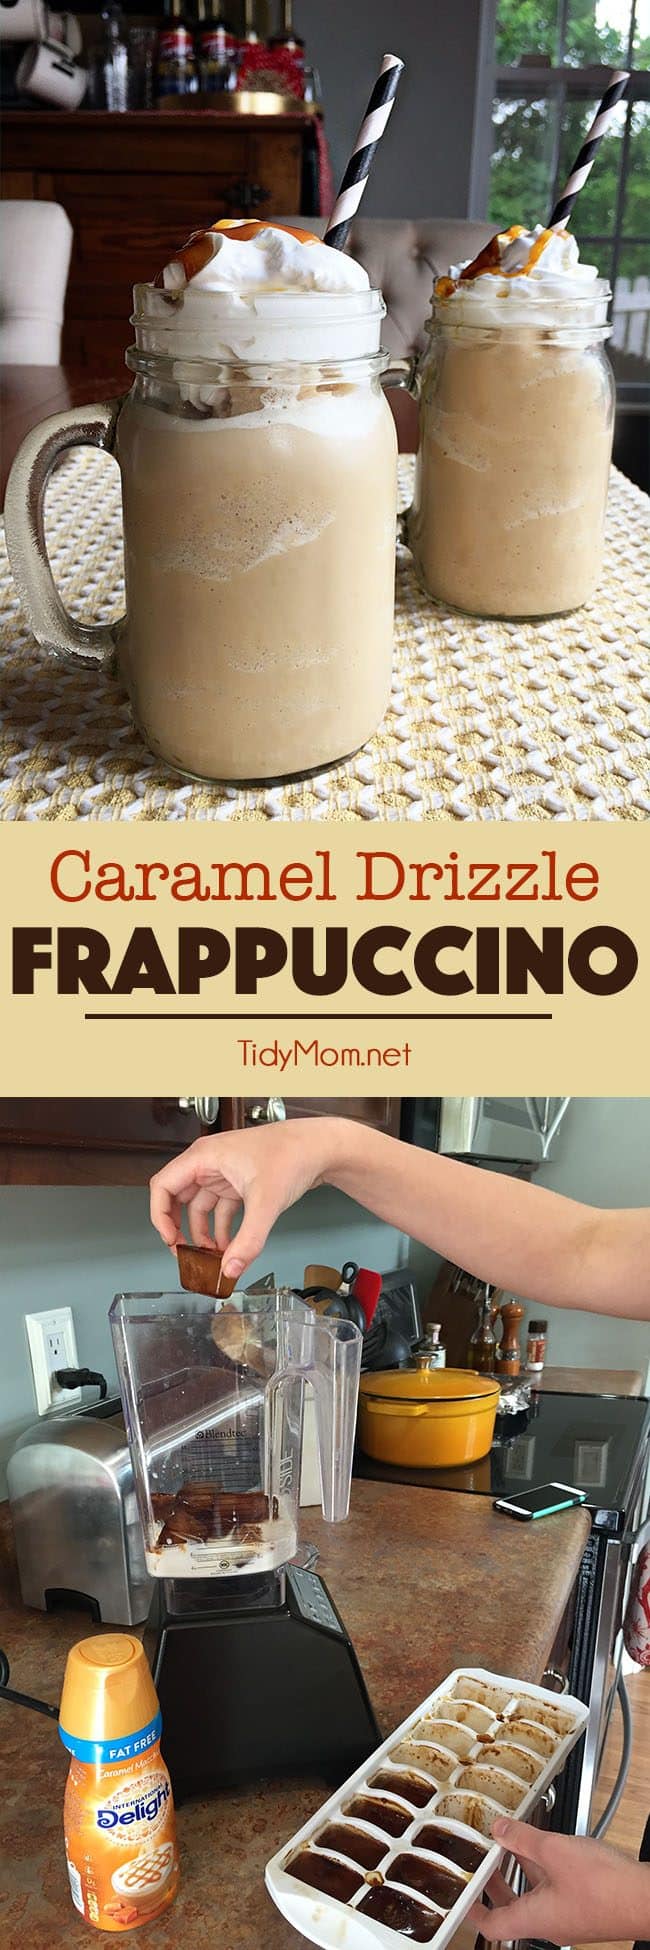 Homemade Caramel Drizzle Fappuccino is so easy to make at home and much cheaper than hitting up the coffee shops! get the recipe and directions for this frappuccino at TidyMom.net